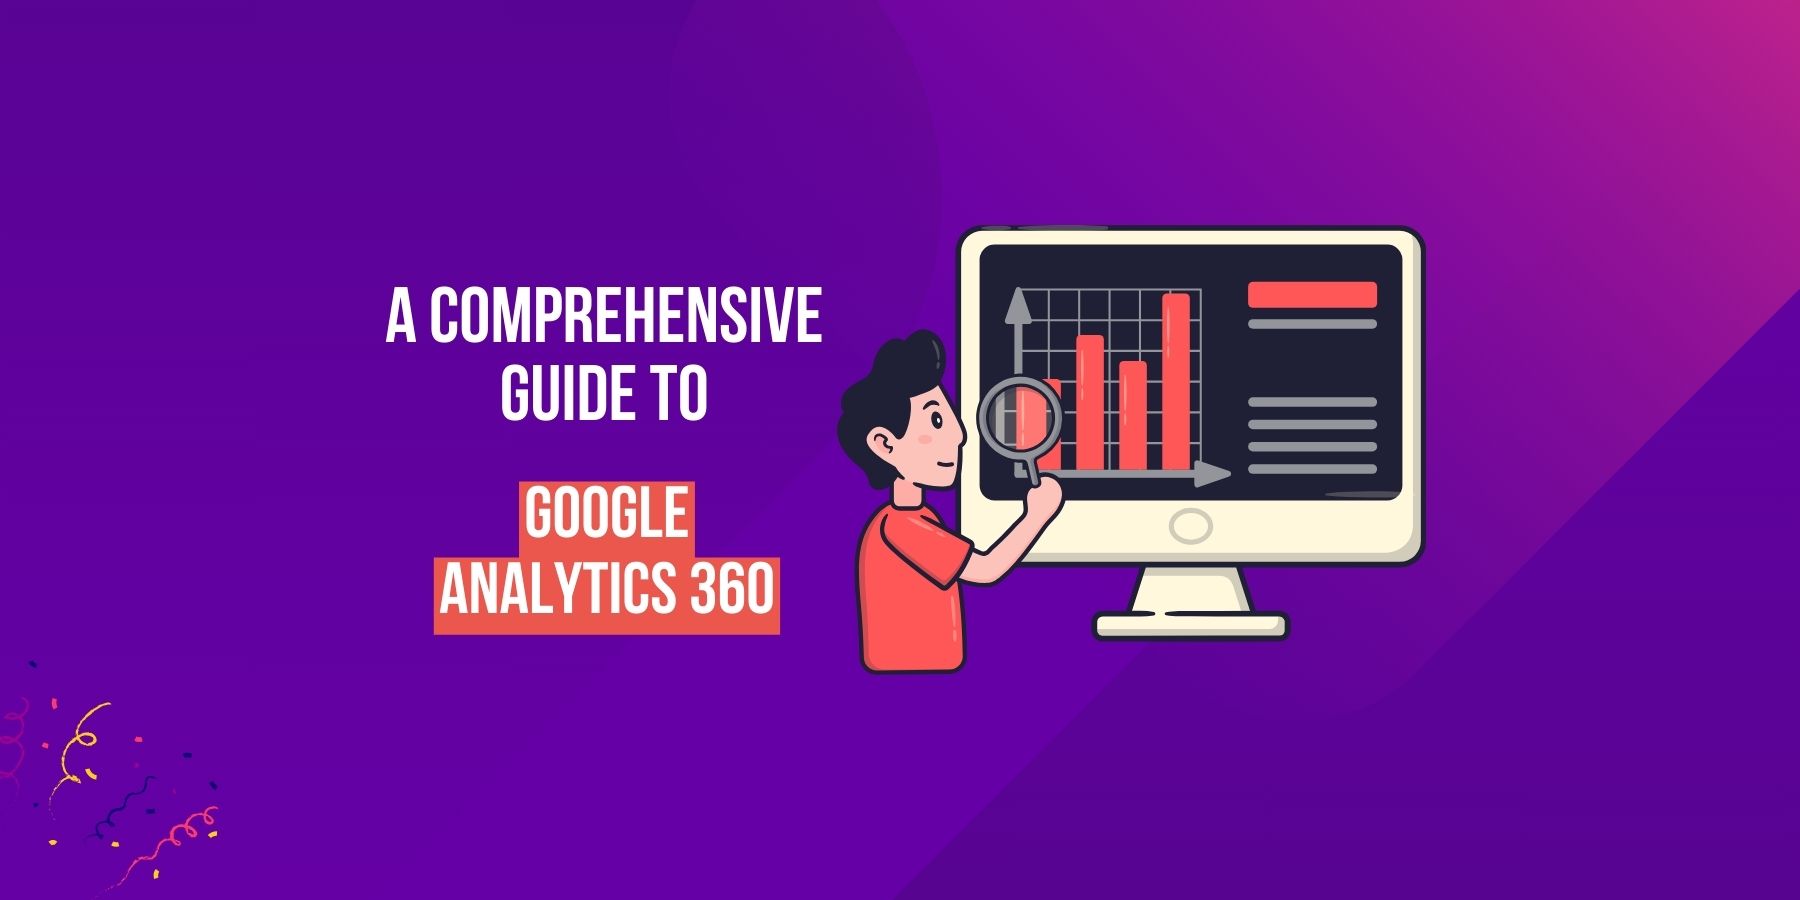 A Comprehensive Guide to Google Analytics 360